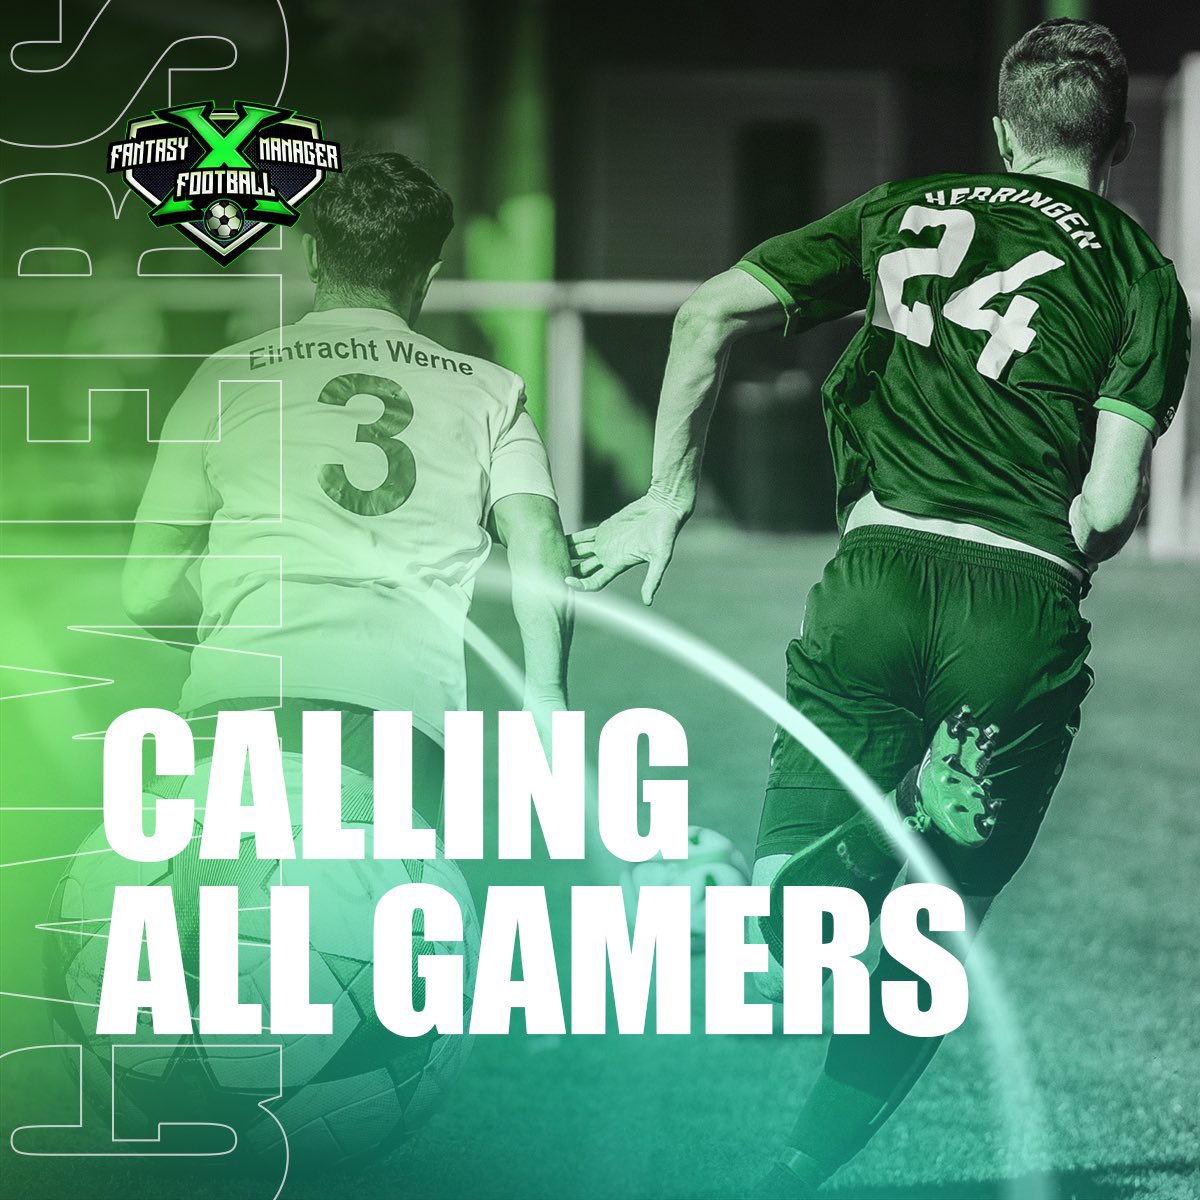 Dive into the ultimate #football frenzy with Fantasy Manager Football X!🚀 

Build your squad, conquer the leagues, and $CASH in on real #rewards! Don't just watch the game, BE the #game. 

Stay tuned to be part of the revolution!

#BarcaPsg #BlockchainGaming #lufc #ardaguler